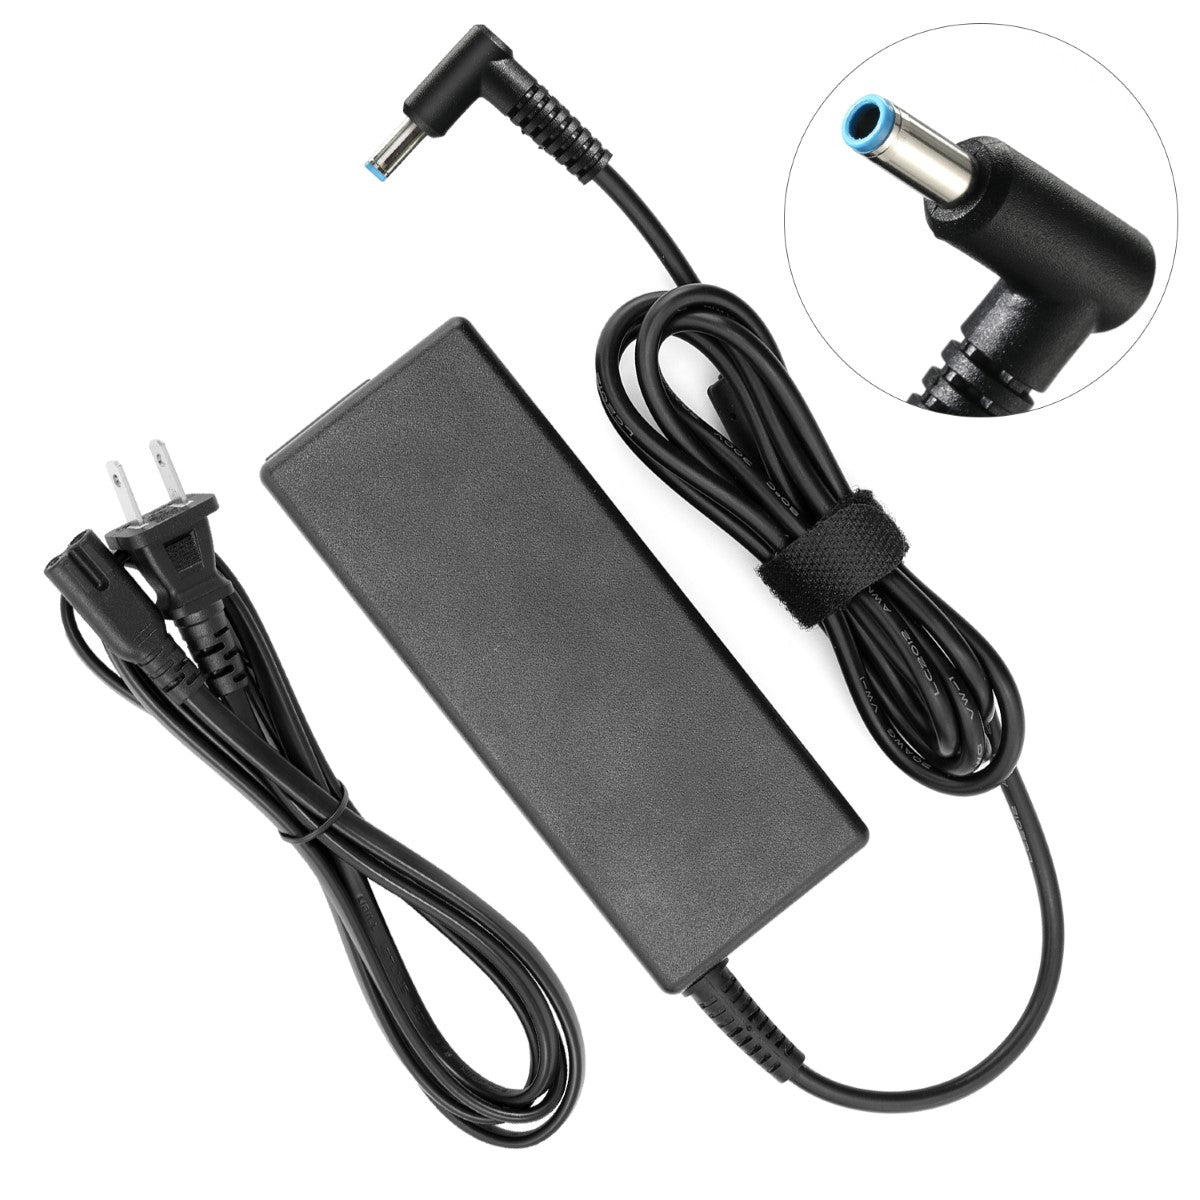 Charger for HP Spectre 13-4103dx x360 Laptop